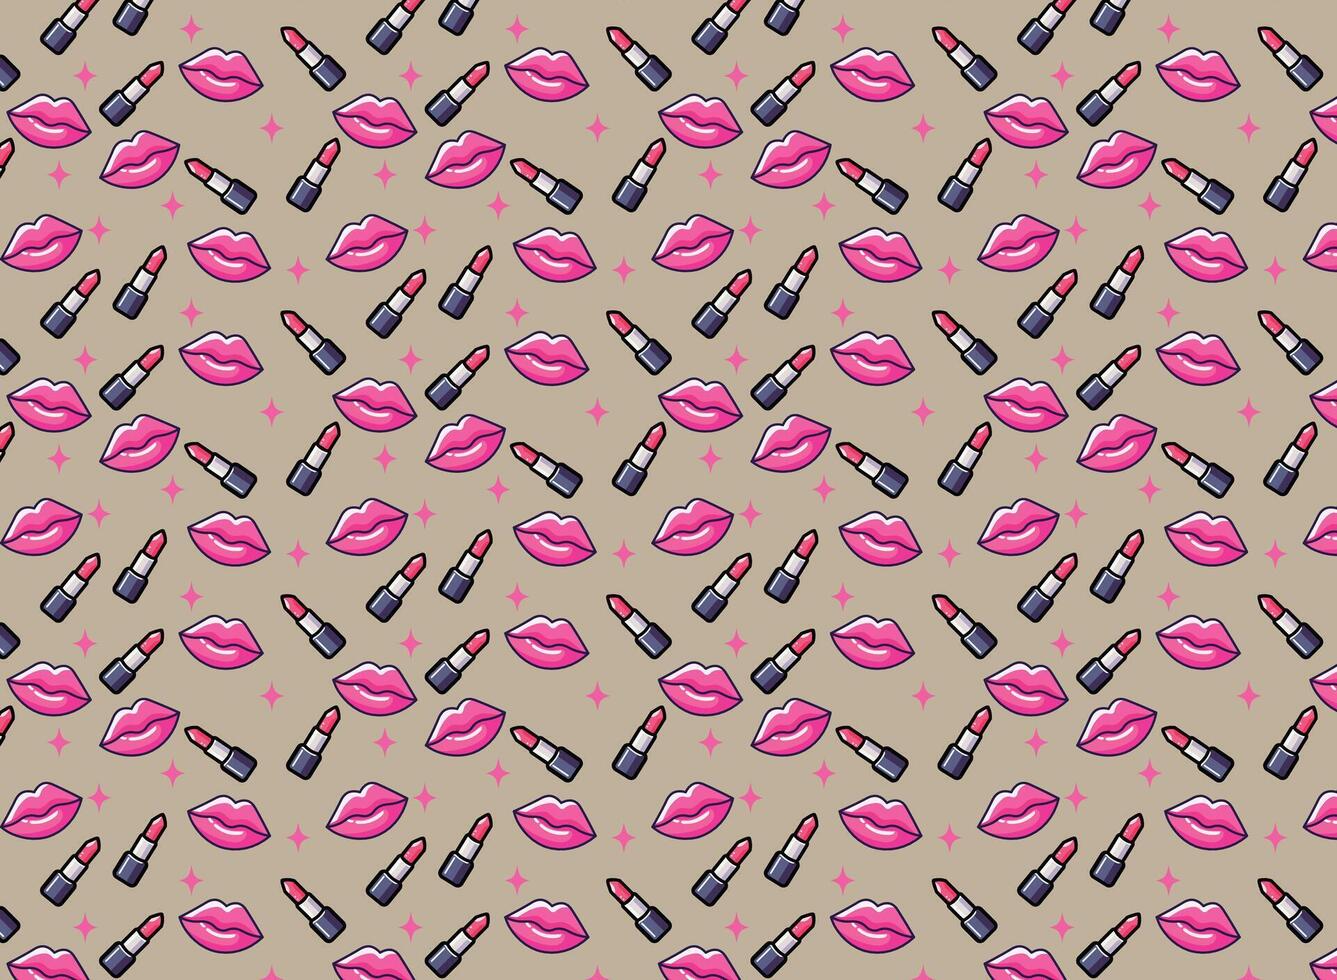 mouth, lipstick, background pattern, vector, in shades of red, ideal for backgrounds, fabrics, vector